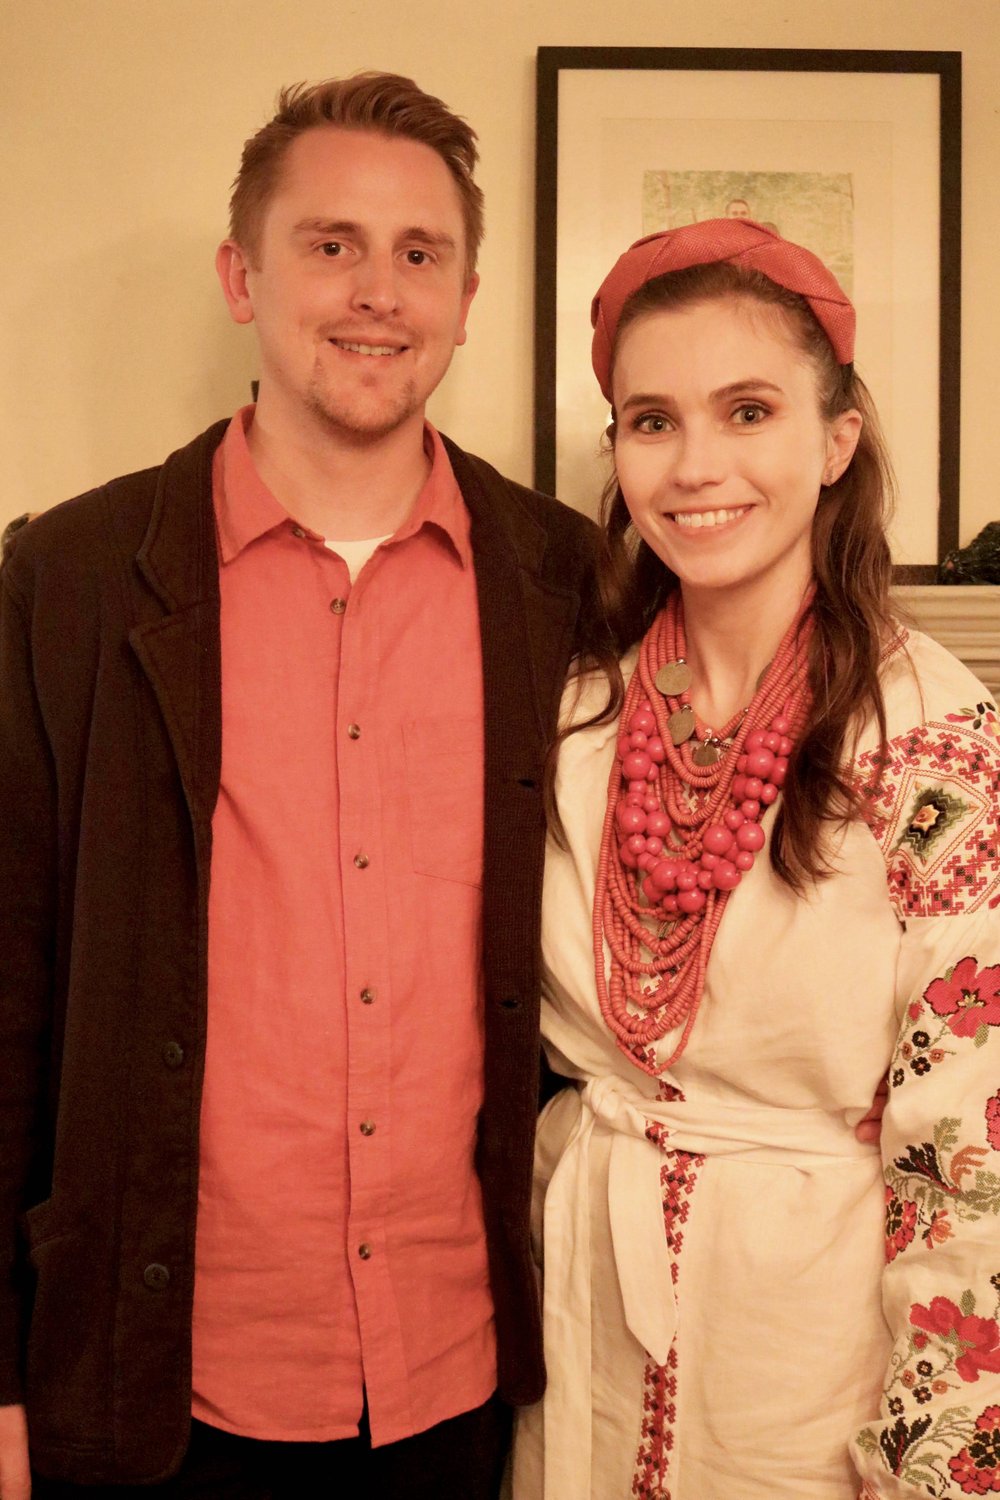 Chris and I at the rehearsal dinner